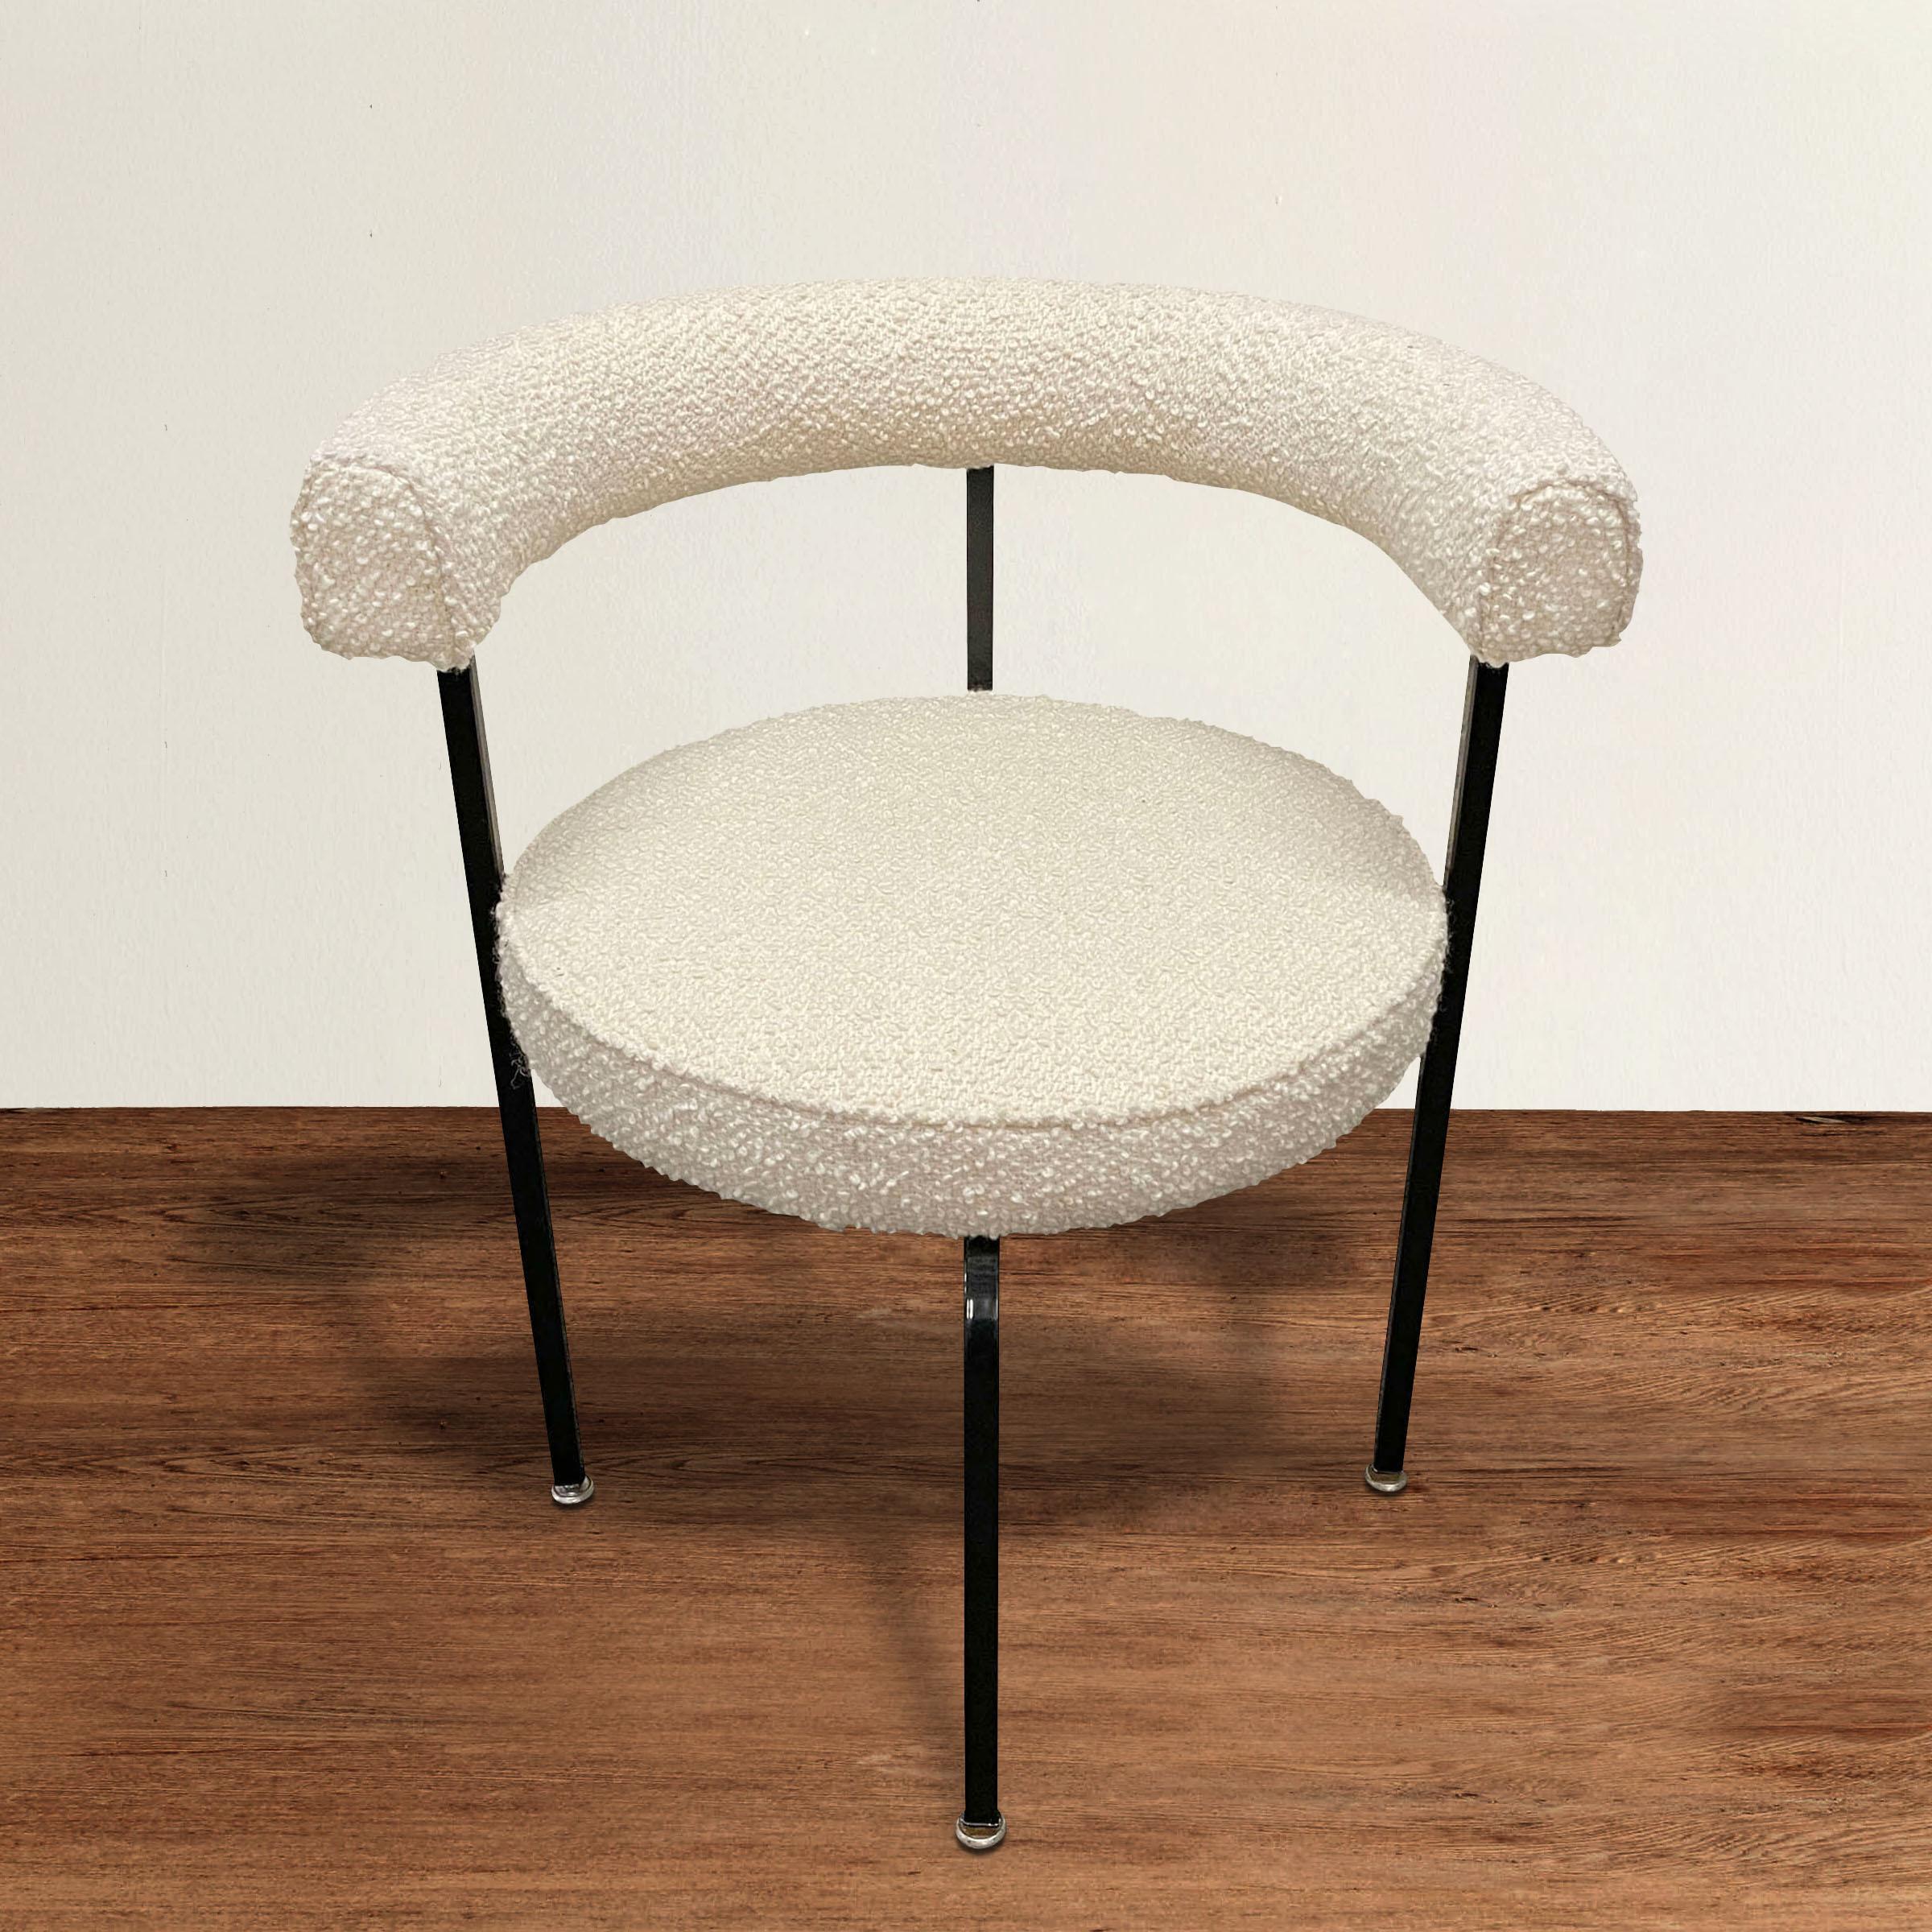 A chic sculptural vintage American roundback armchair newly upholstered in a chunky white wool bouclé, and newly painted steel frame. The perfect office or desk chair, or tucked in a corner of your living room or bedroom.